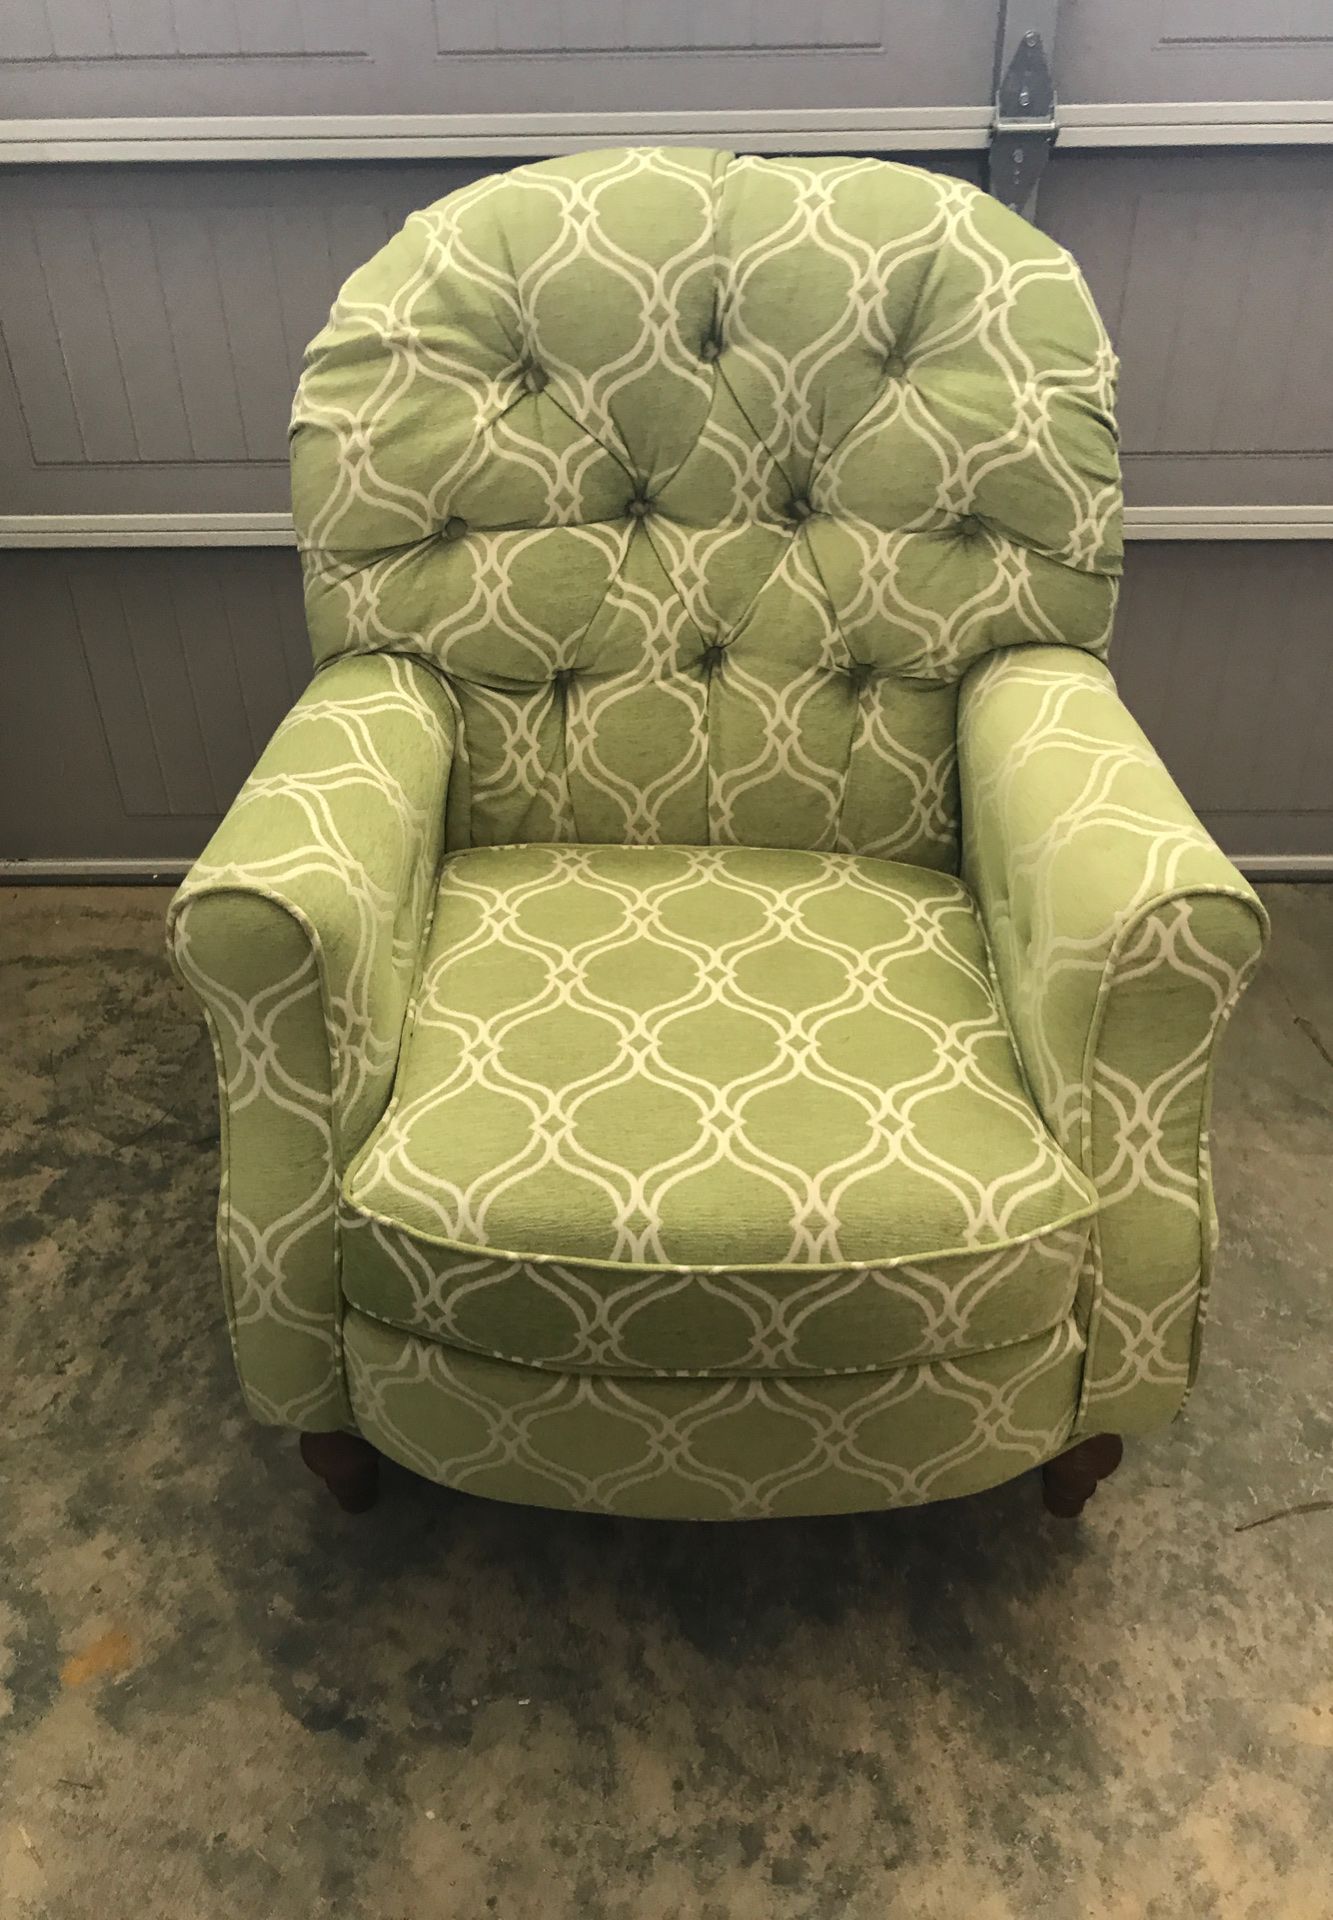 Two arm chairs, soft green color. In good condition.